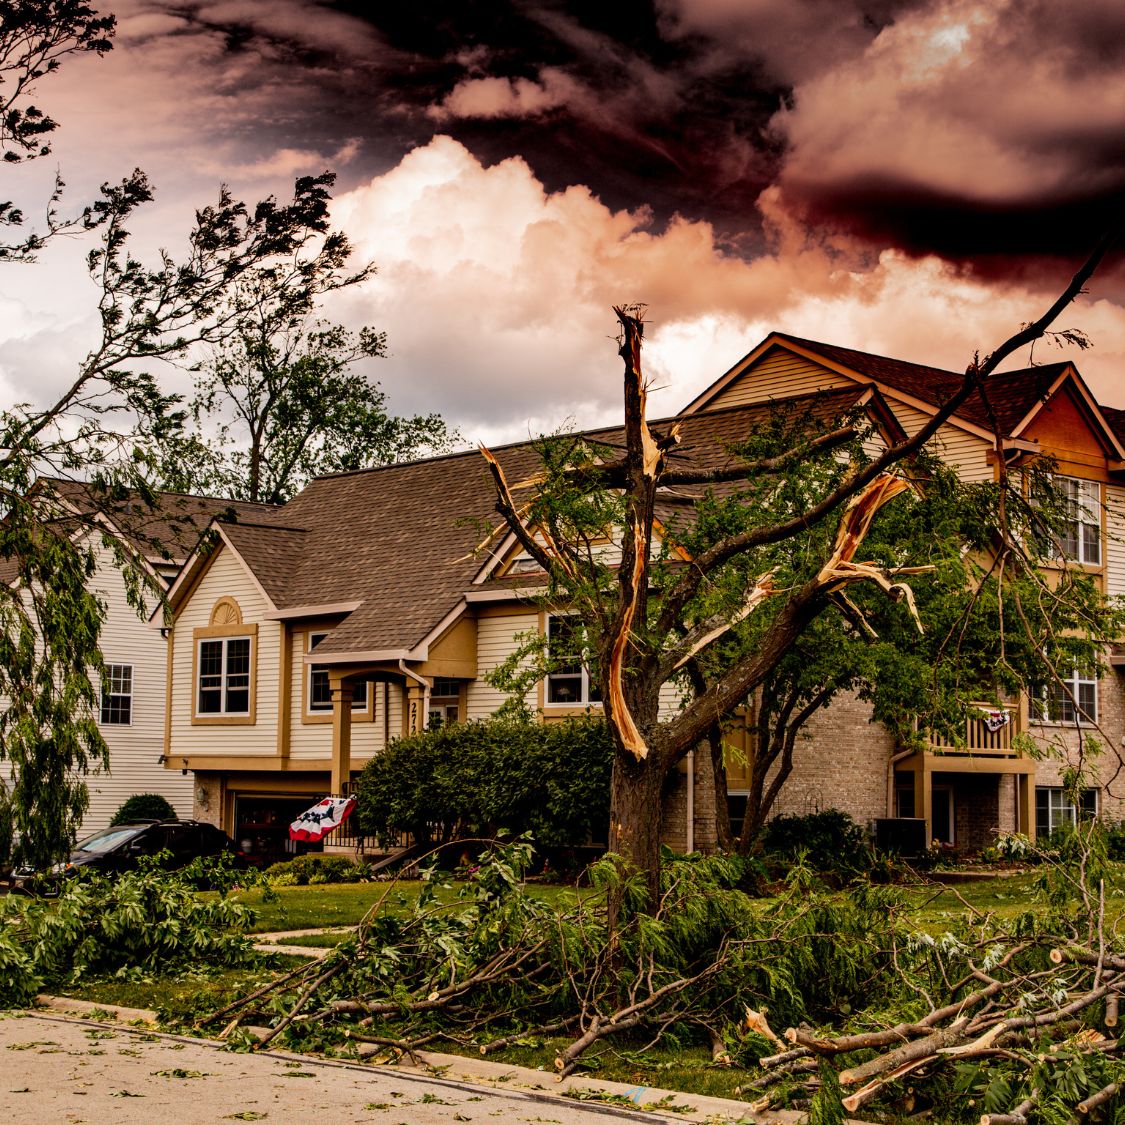 The Different Ways the Weather Can Damage Your Home